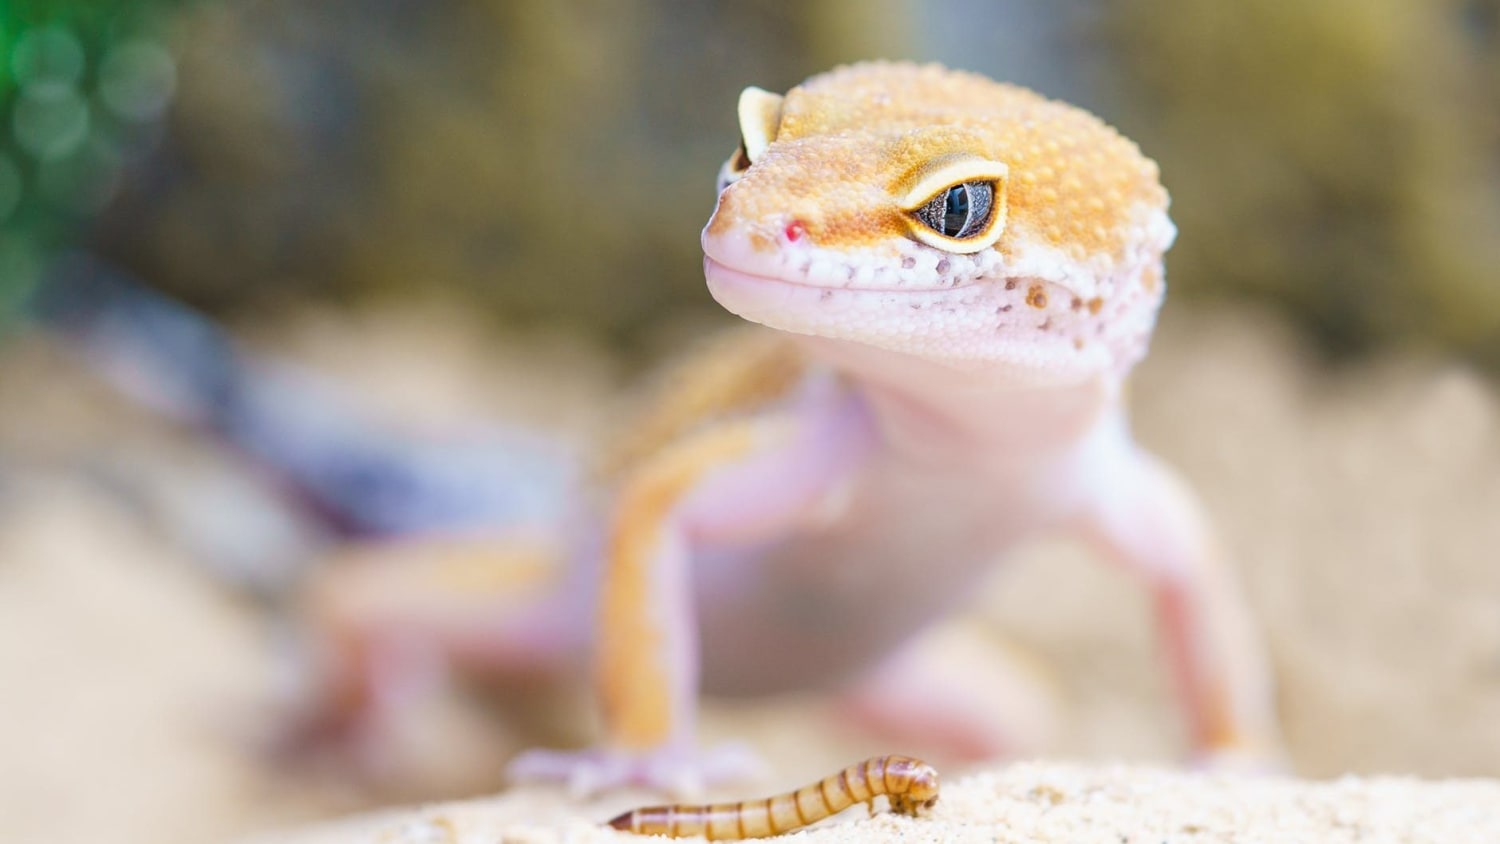 Meet the first genetically modified reptiles